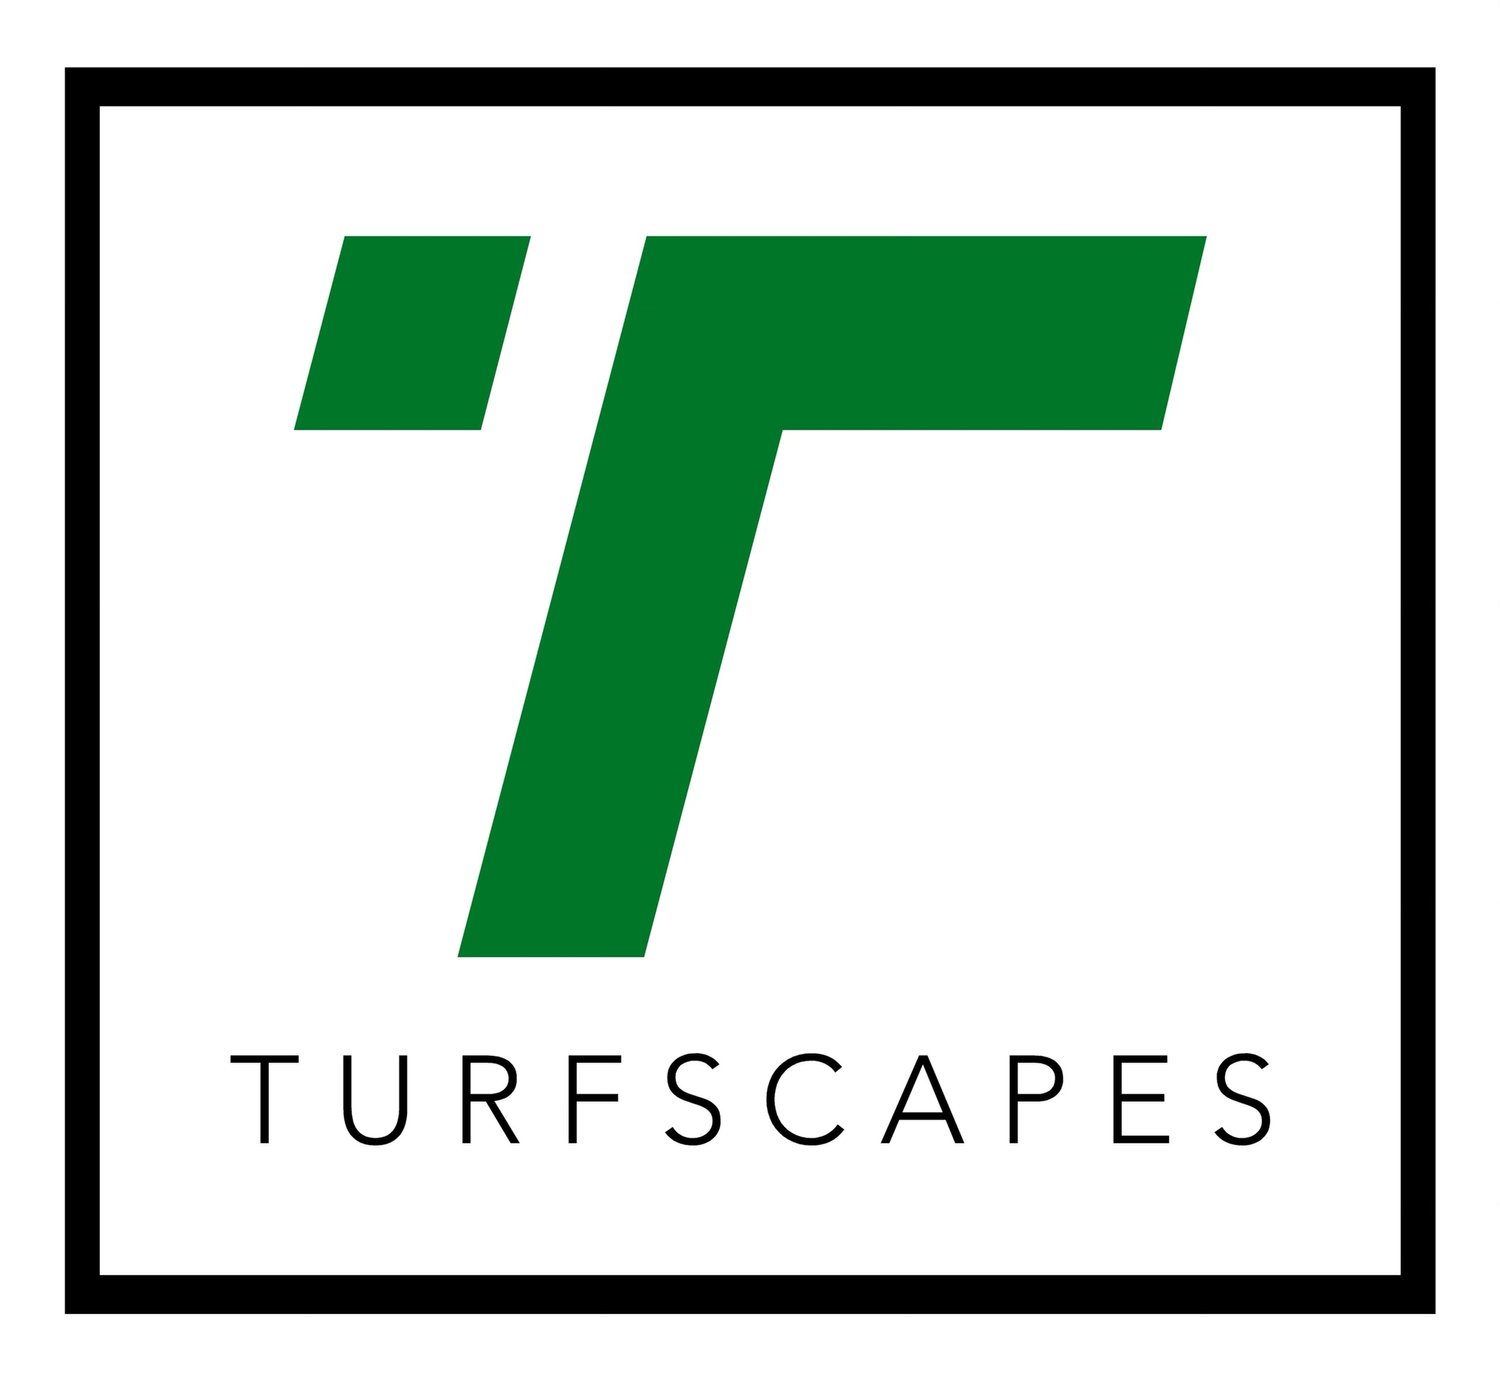 TURFSCAPES